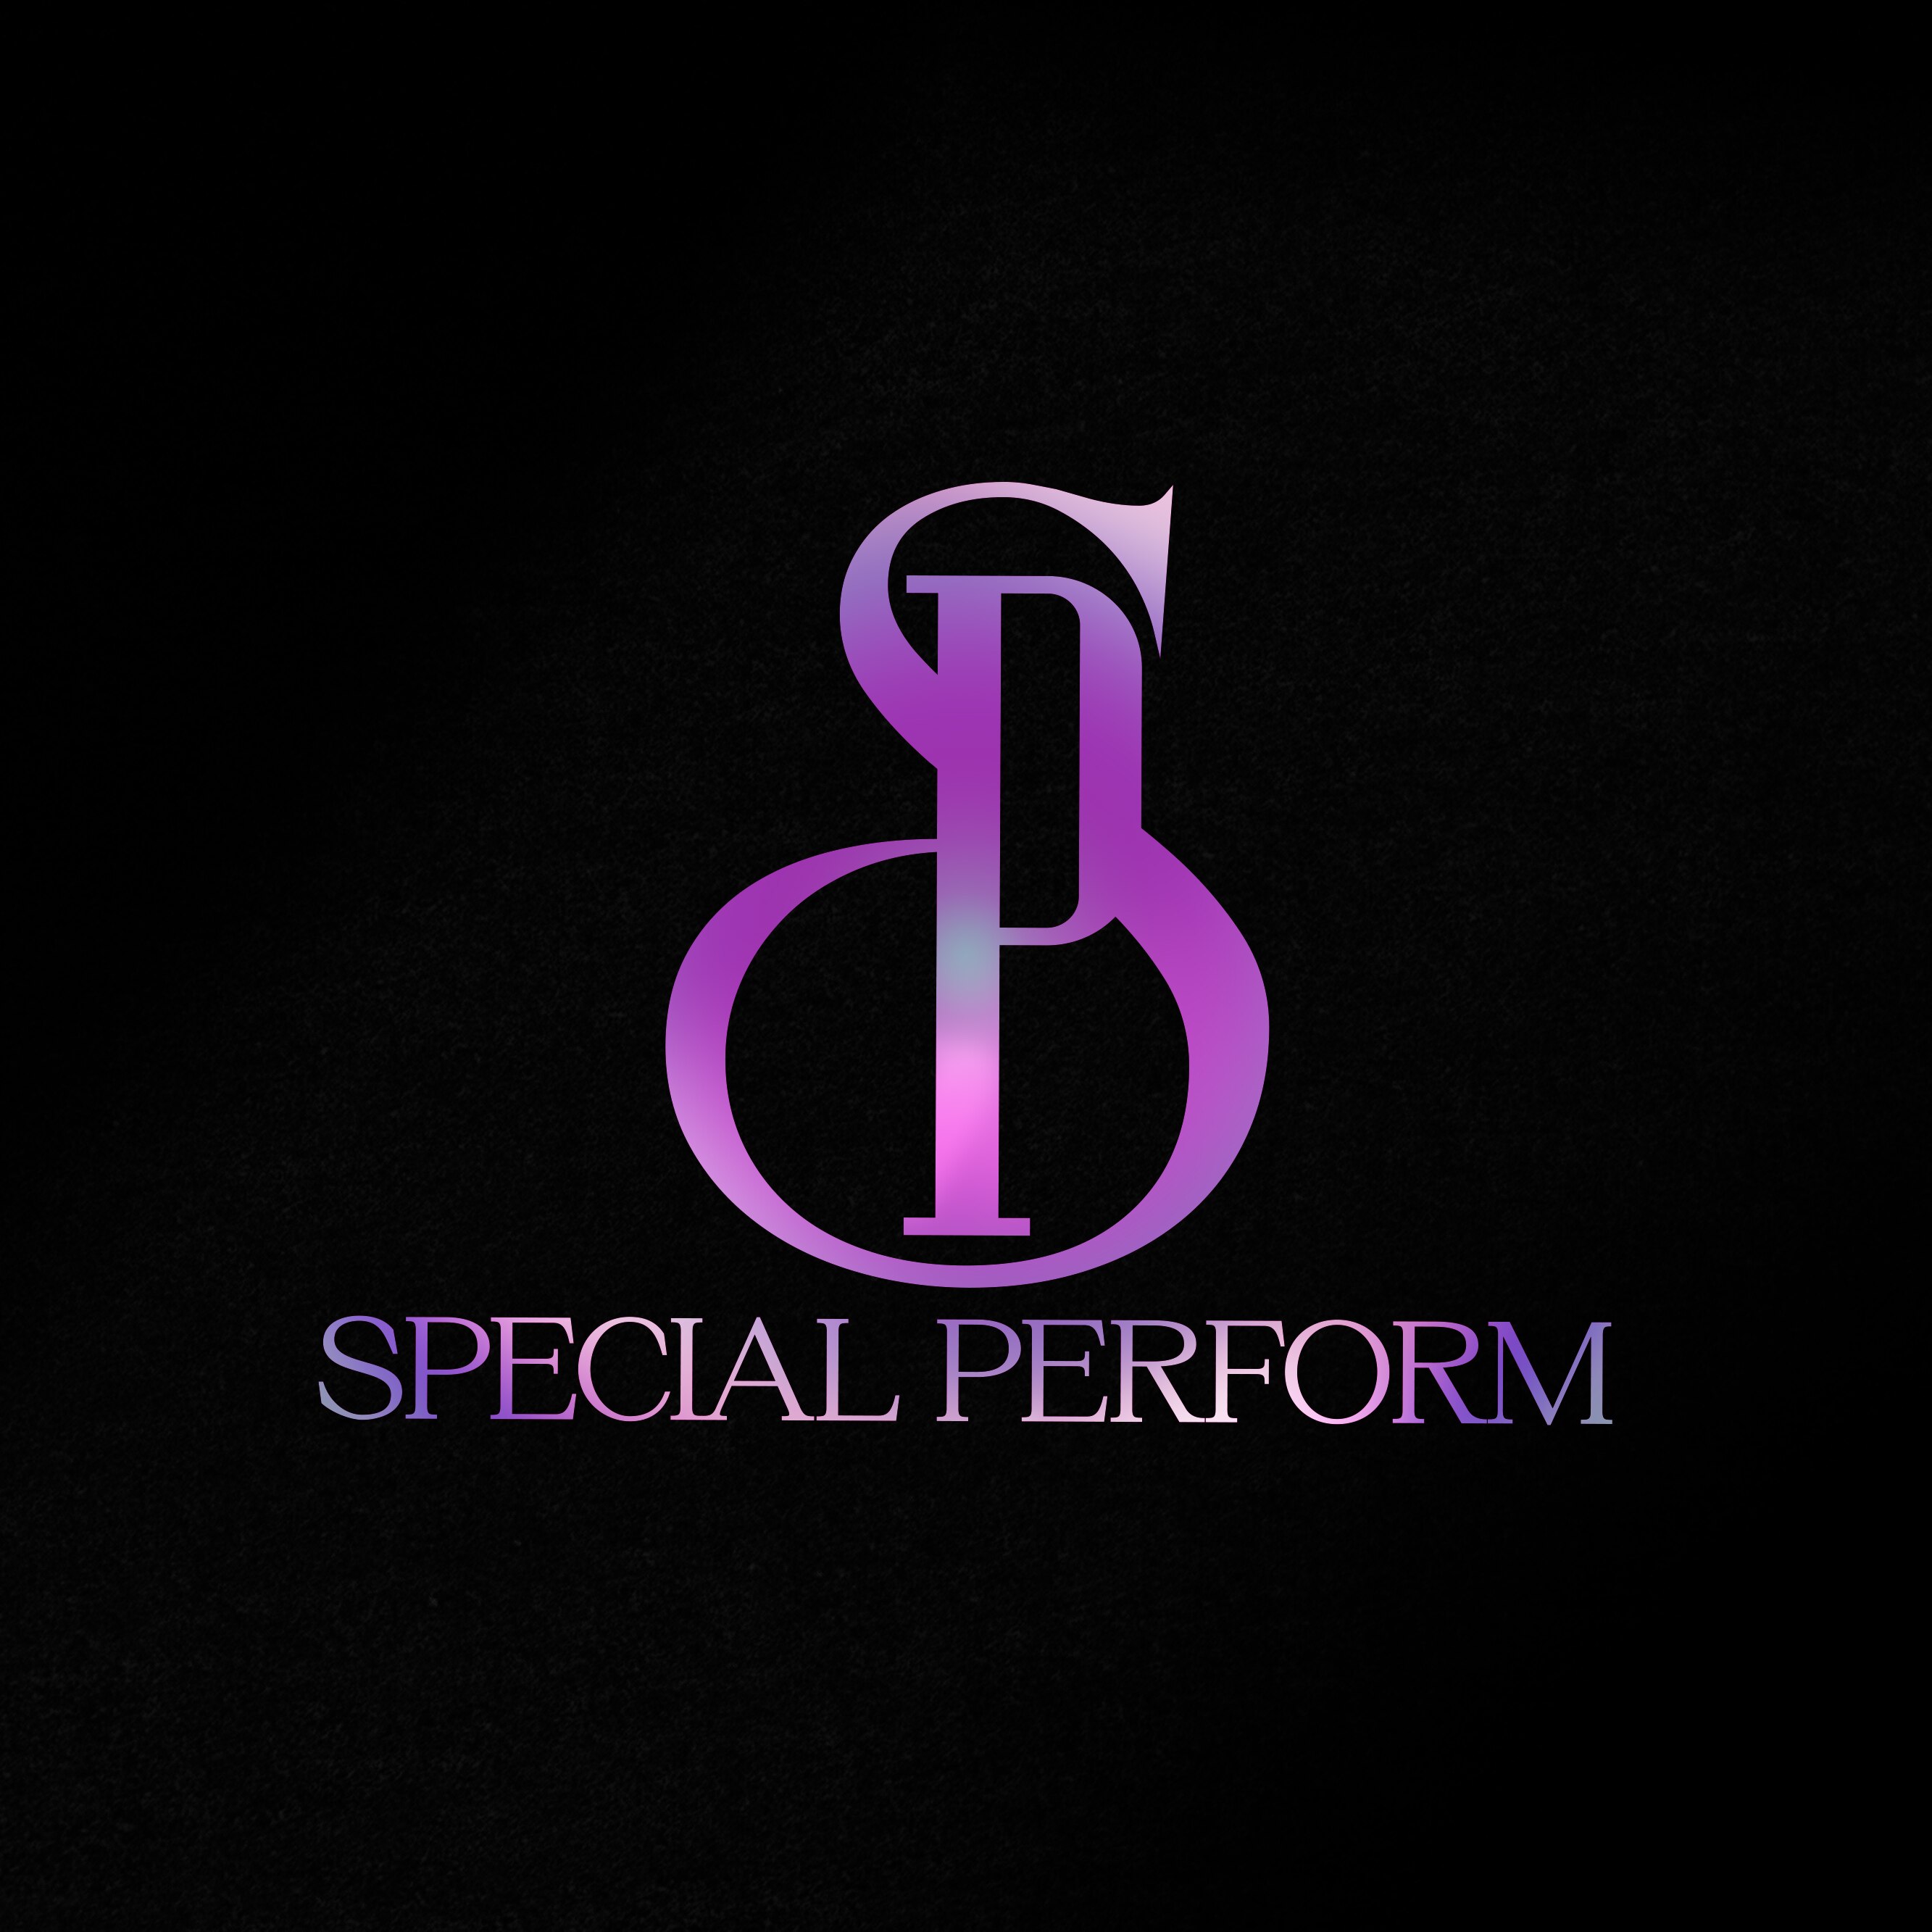 SP Letter and Beauty logo preview image.